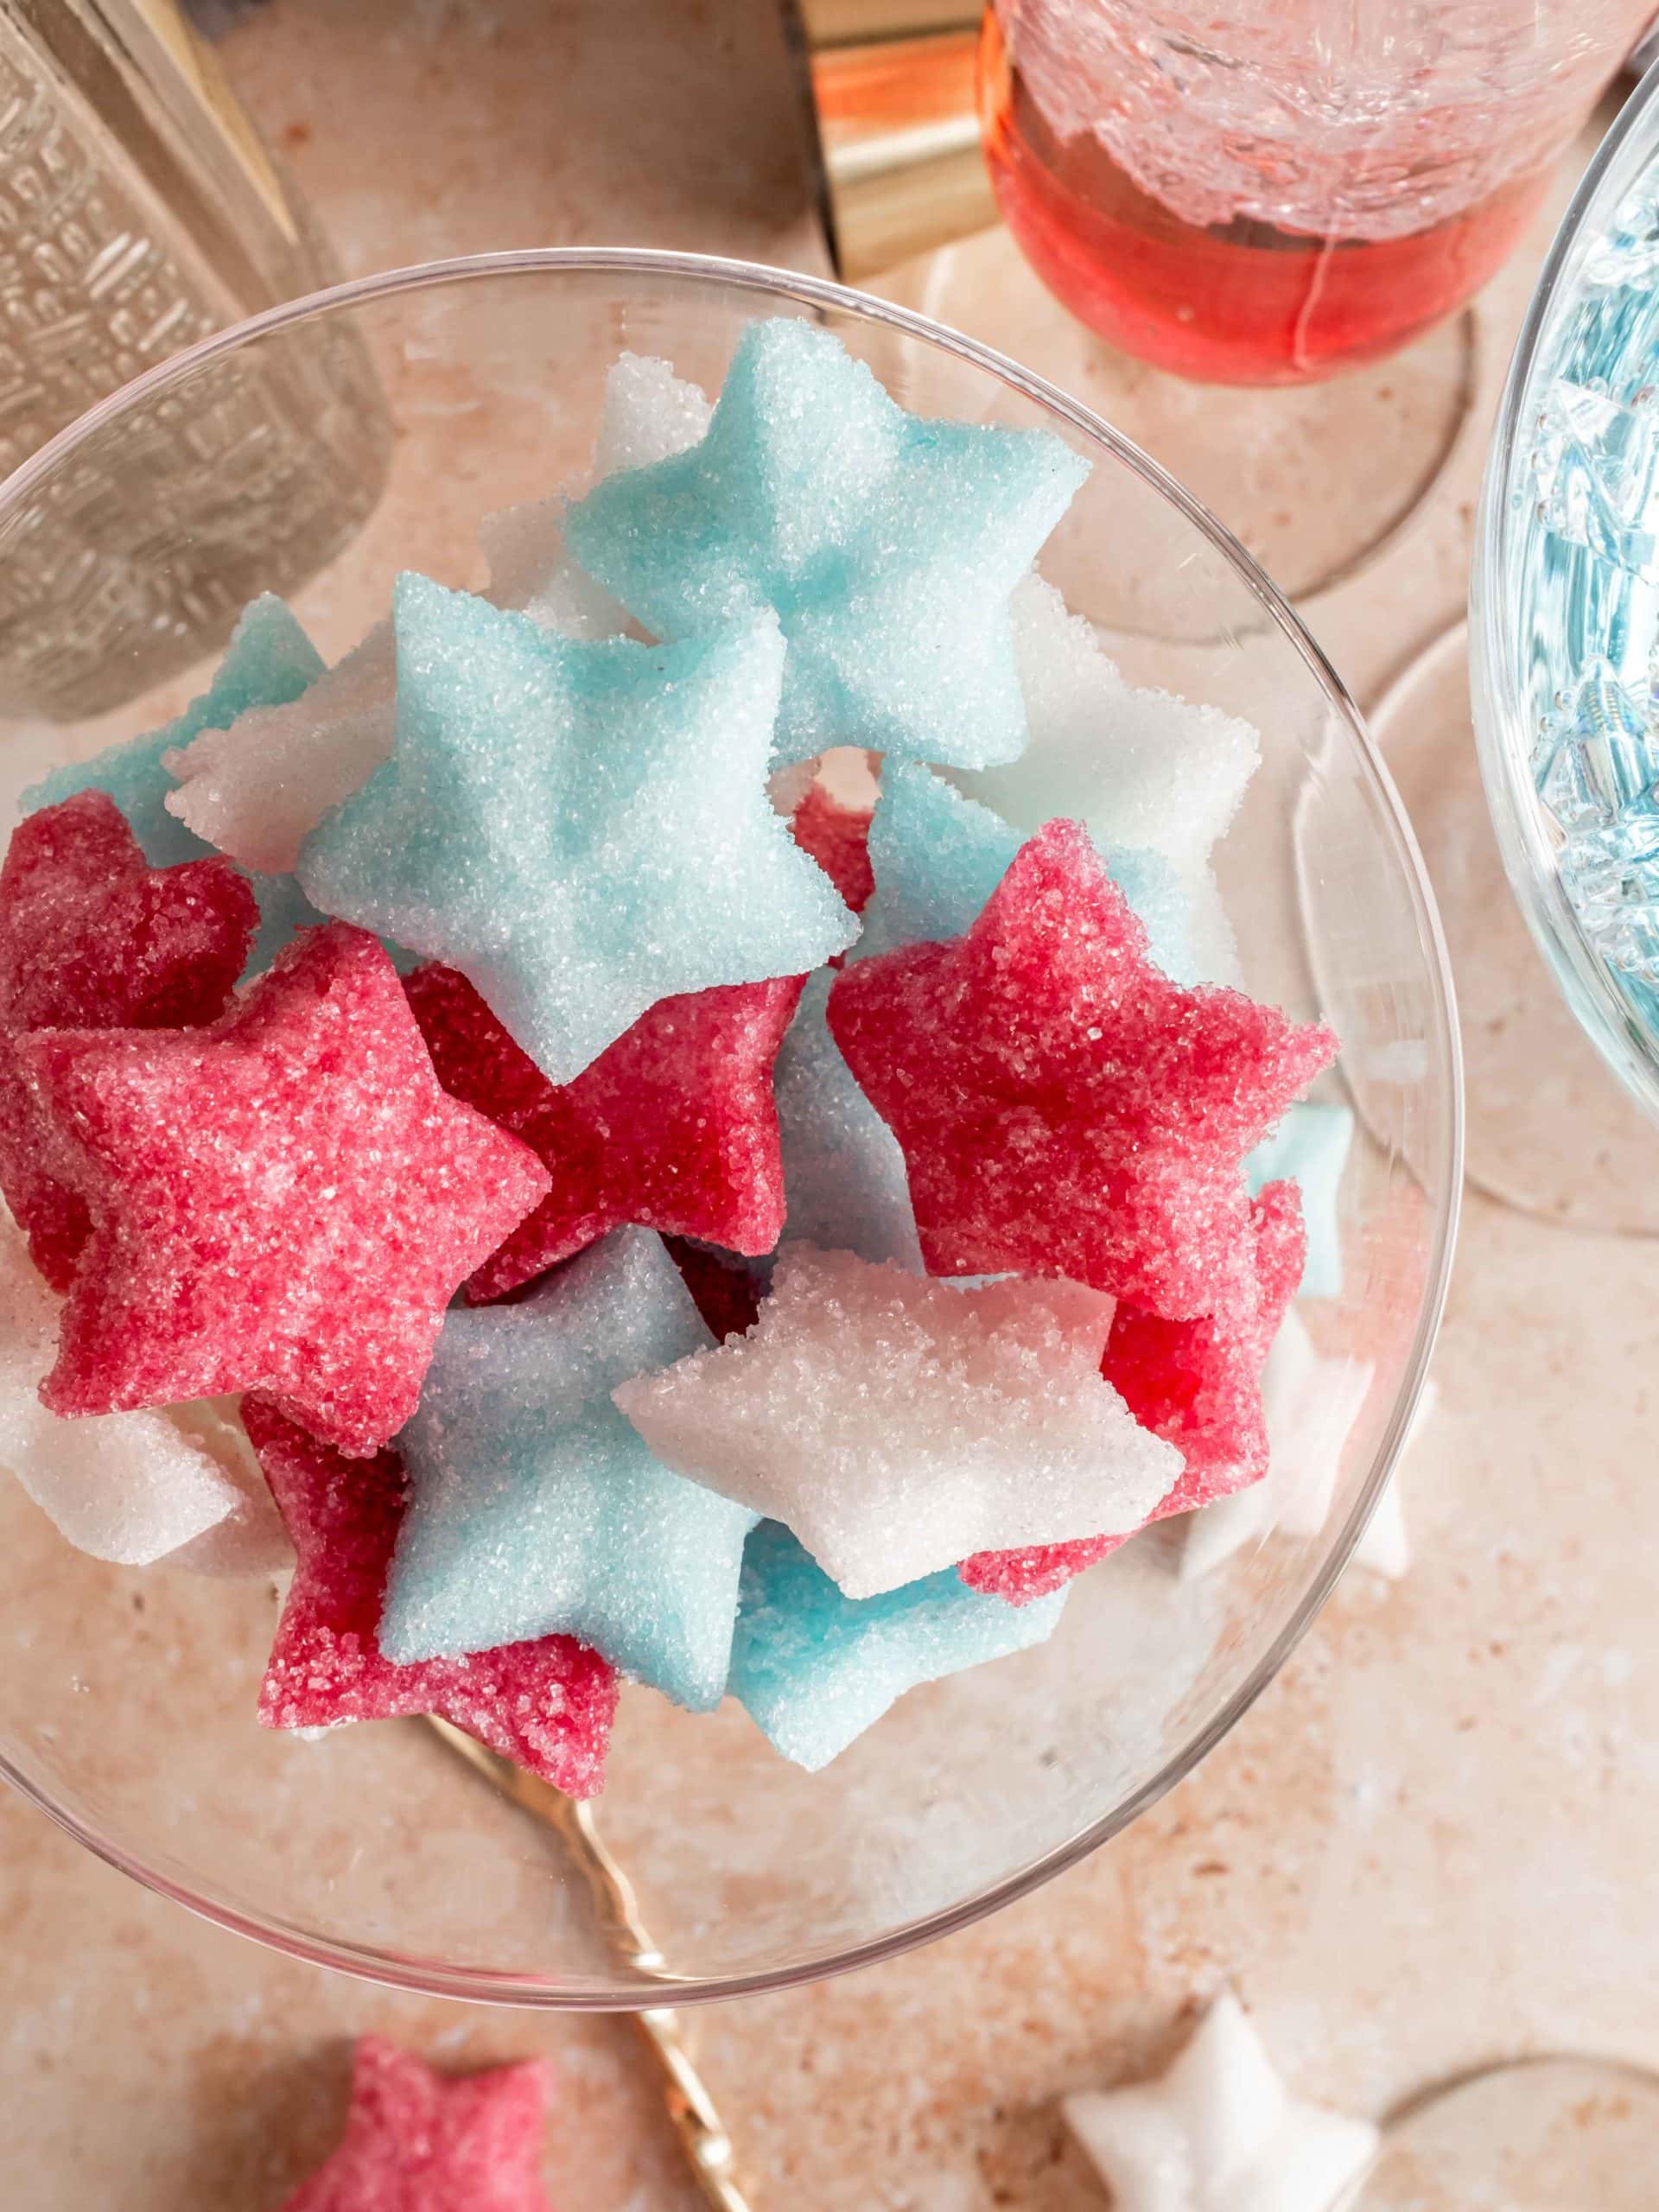 glass full of fourth of july themed sugar cubes